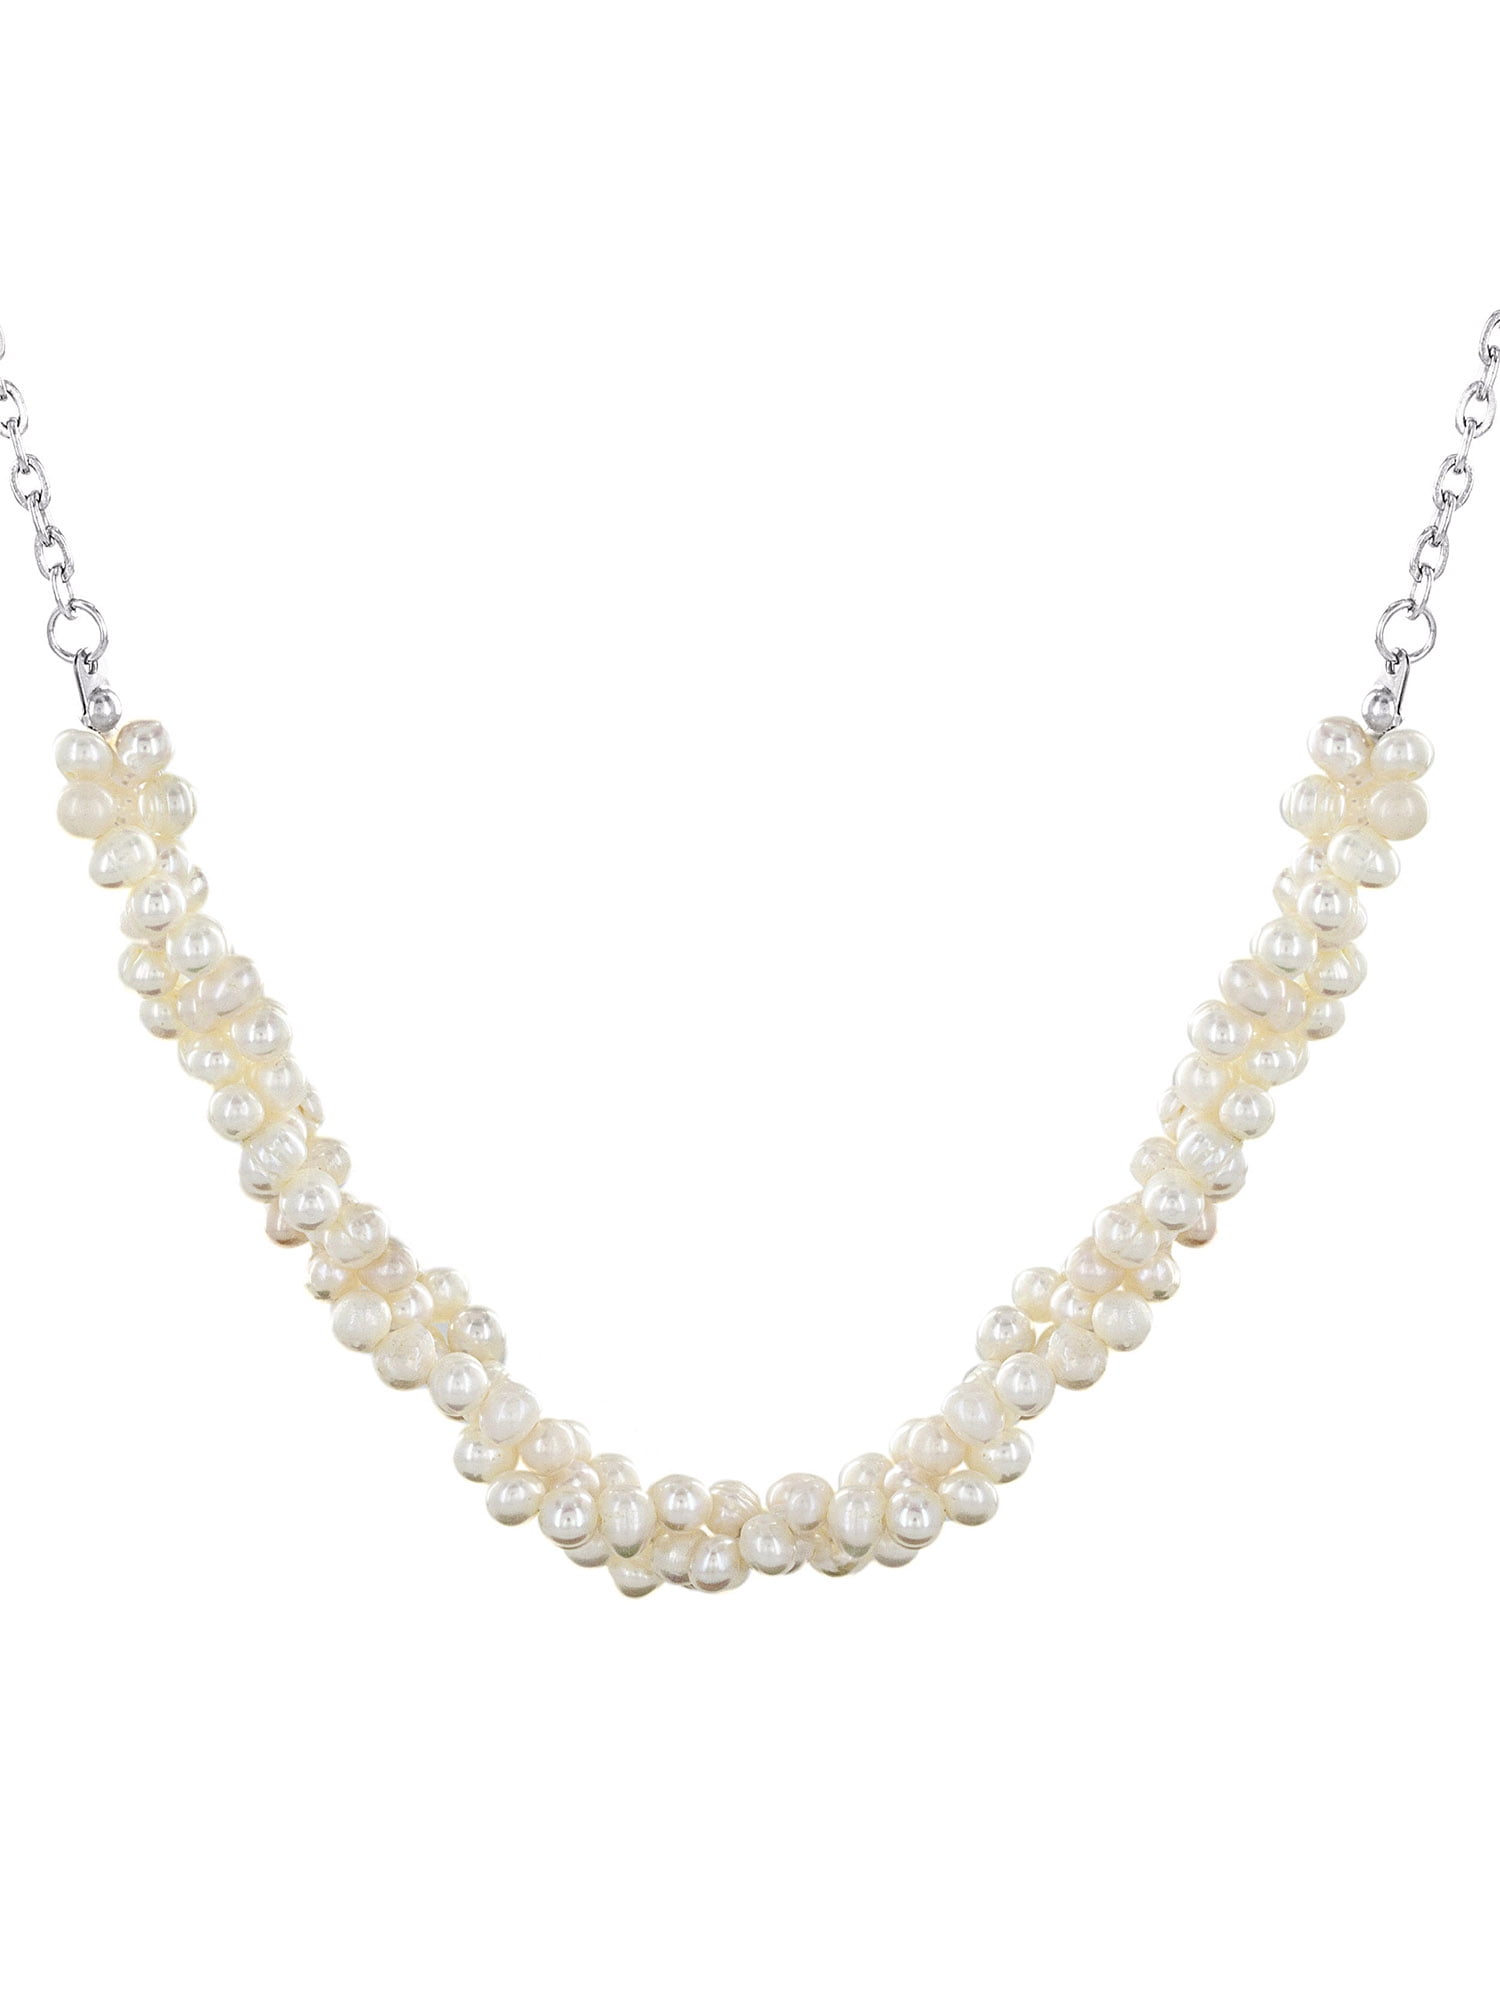 Details about   Two-Row 7mm Natural Fresh Water Pearl Necklace for Women